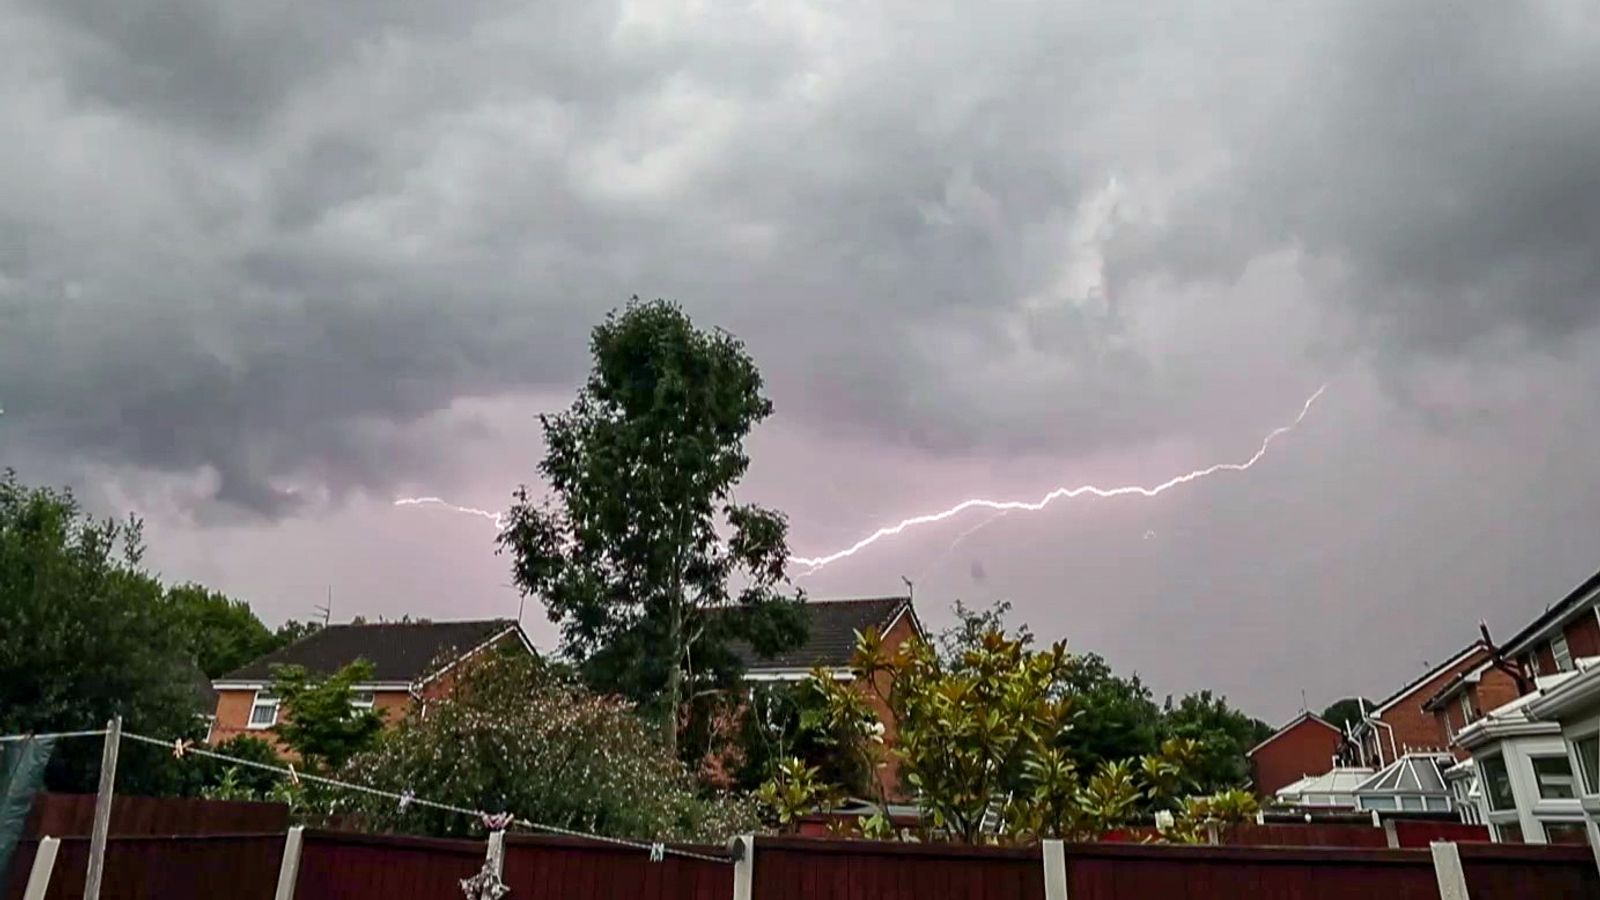 UK weather: Warning of 'danger to life' as thunderstorms to strike most of country